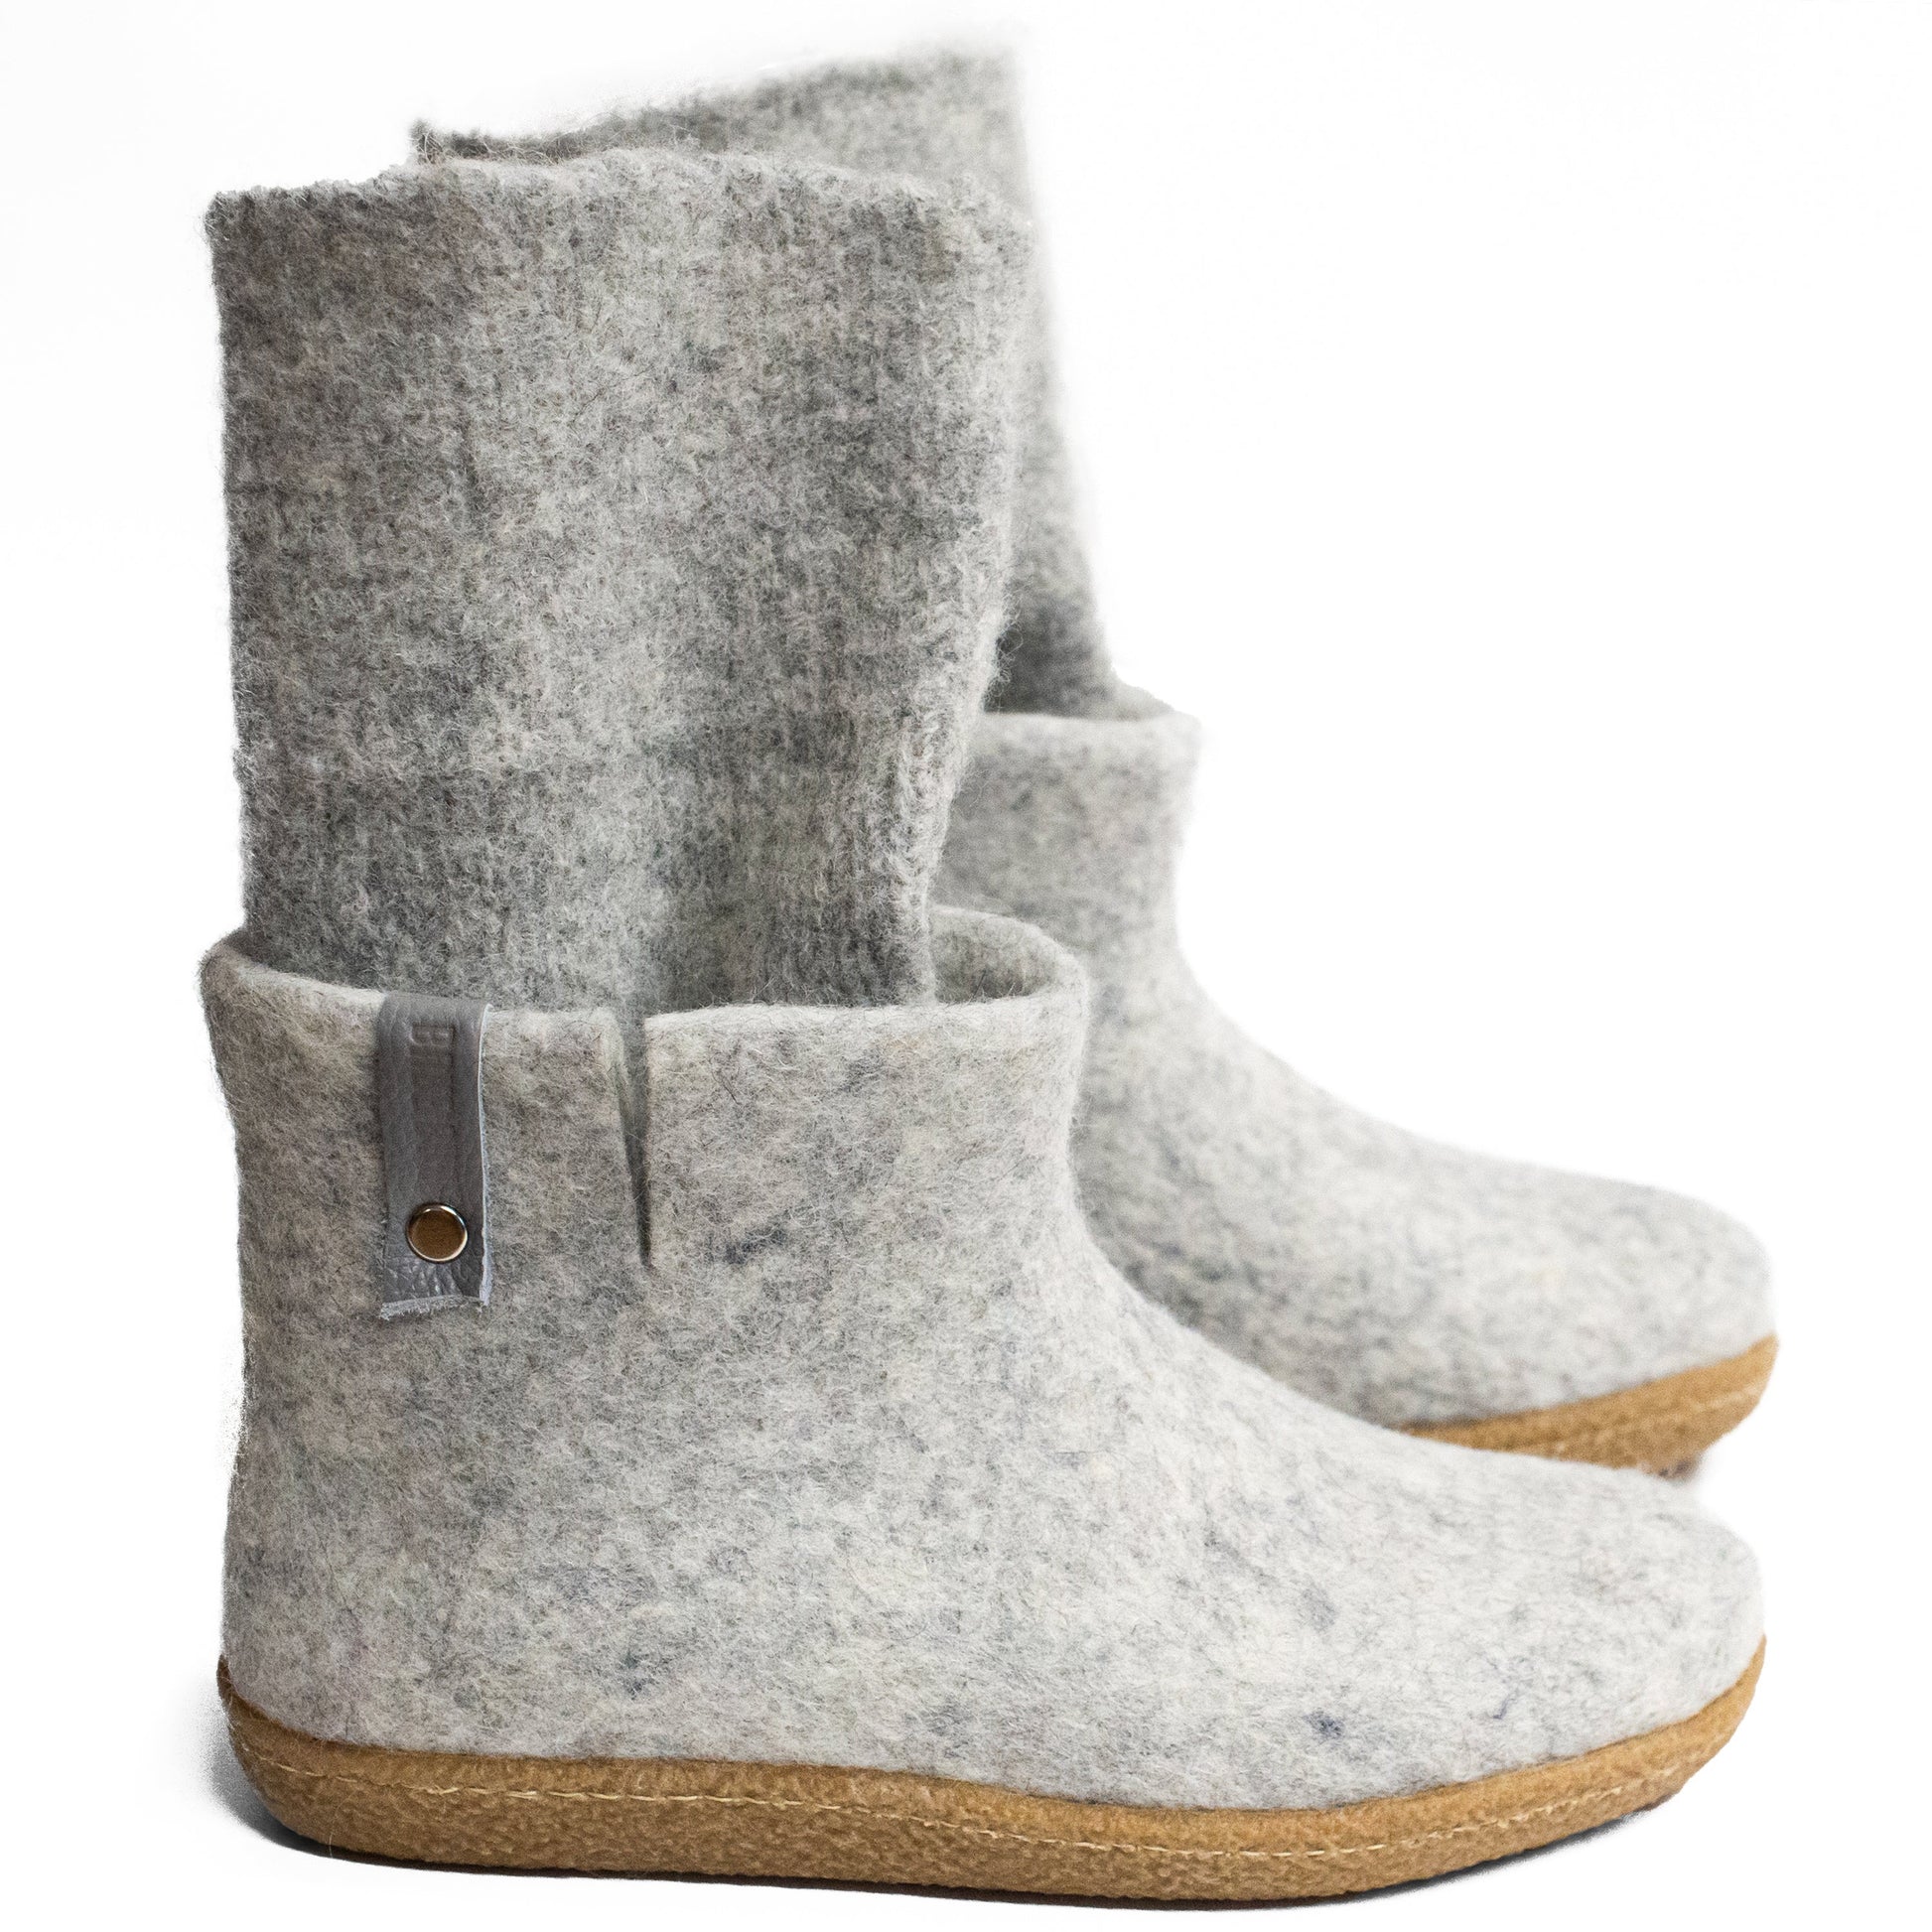 Women's WOOBOOTS with Knitted Leg Warmers, Hand Felted by BureBure –  BureBure shoes and slippers